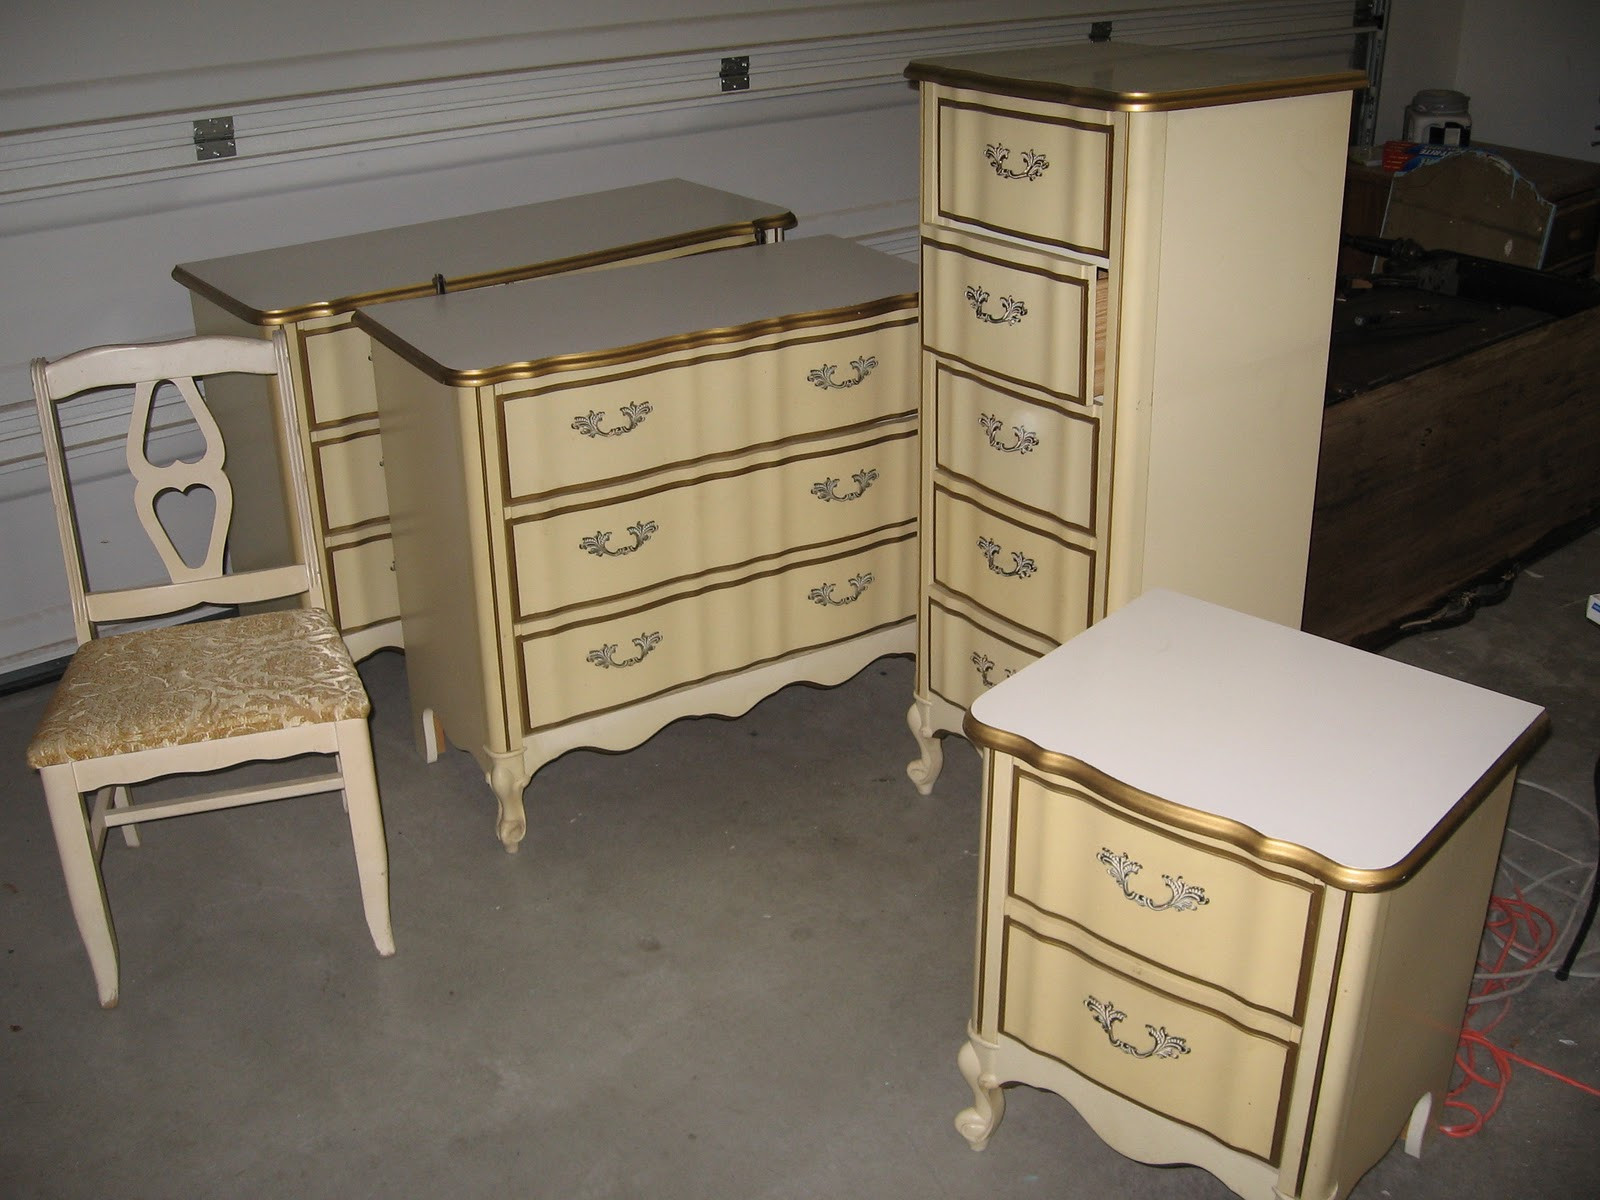 Chalk Painted Bedroom Furniture
 A Brush of Whimsy